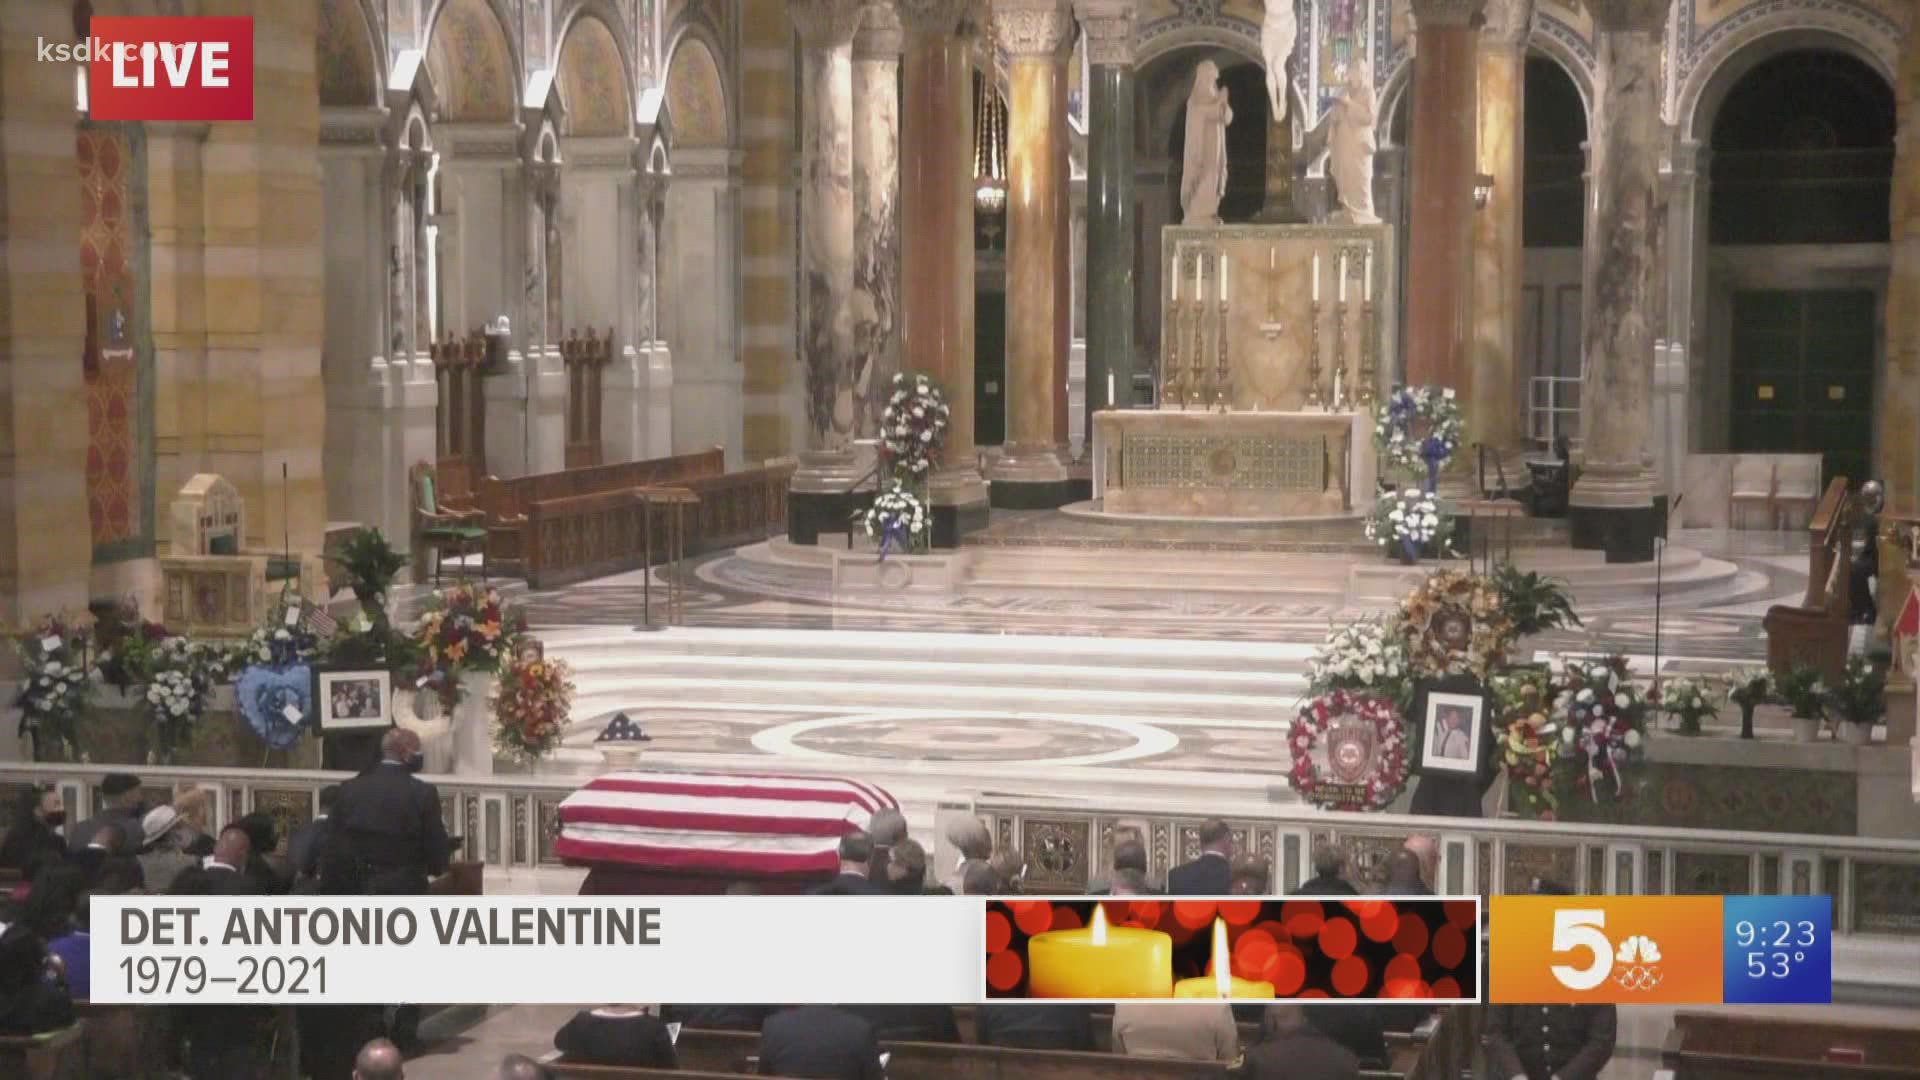 Detective Valentine was killed in a crash in the line of duty last week. He was honored at the Cathedral Basilica of St. Louis.